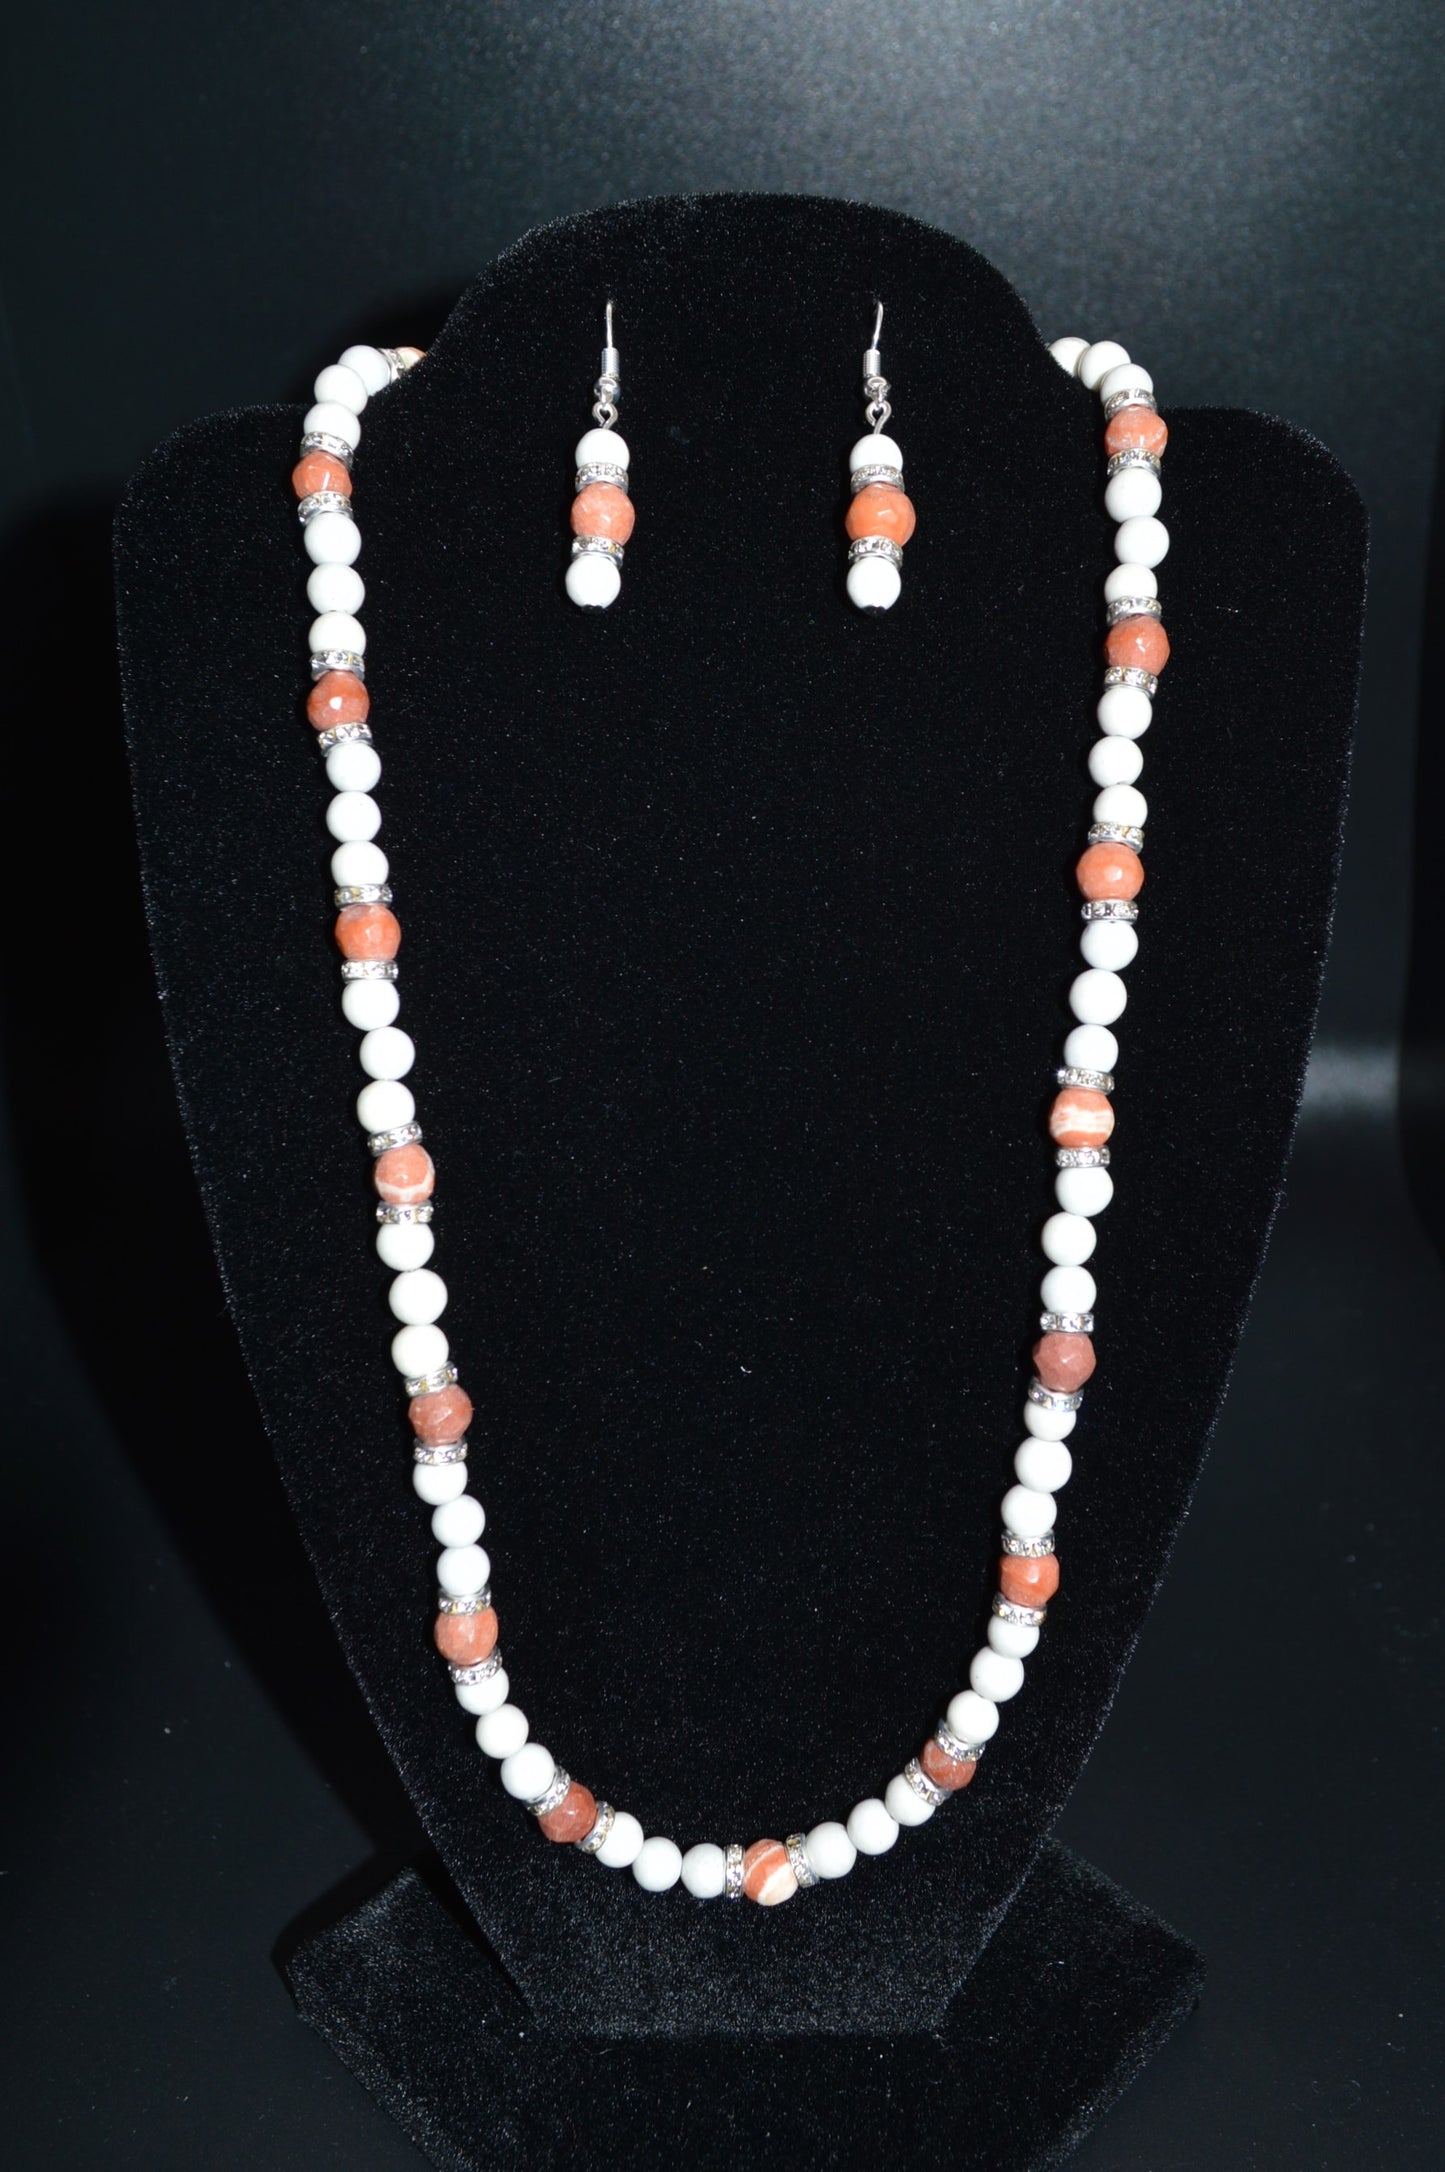 Red Italian Onyx and Black Spotted Feldspar Beaded Necklace and Earring Set